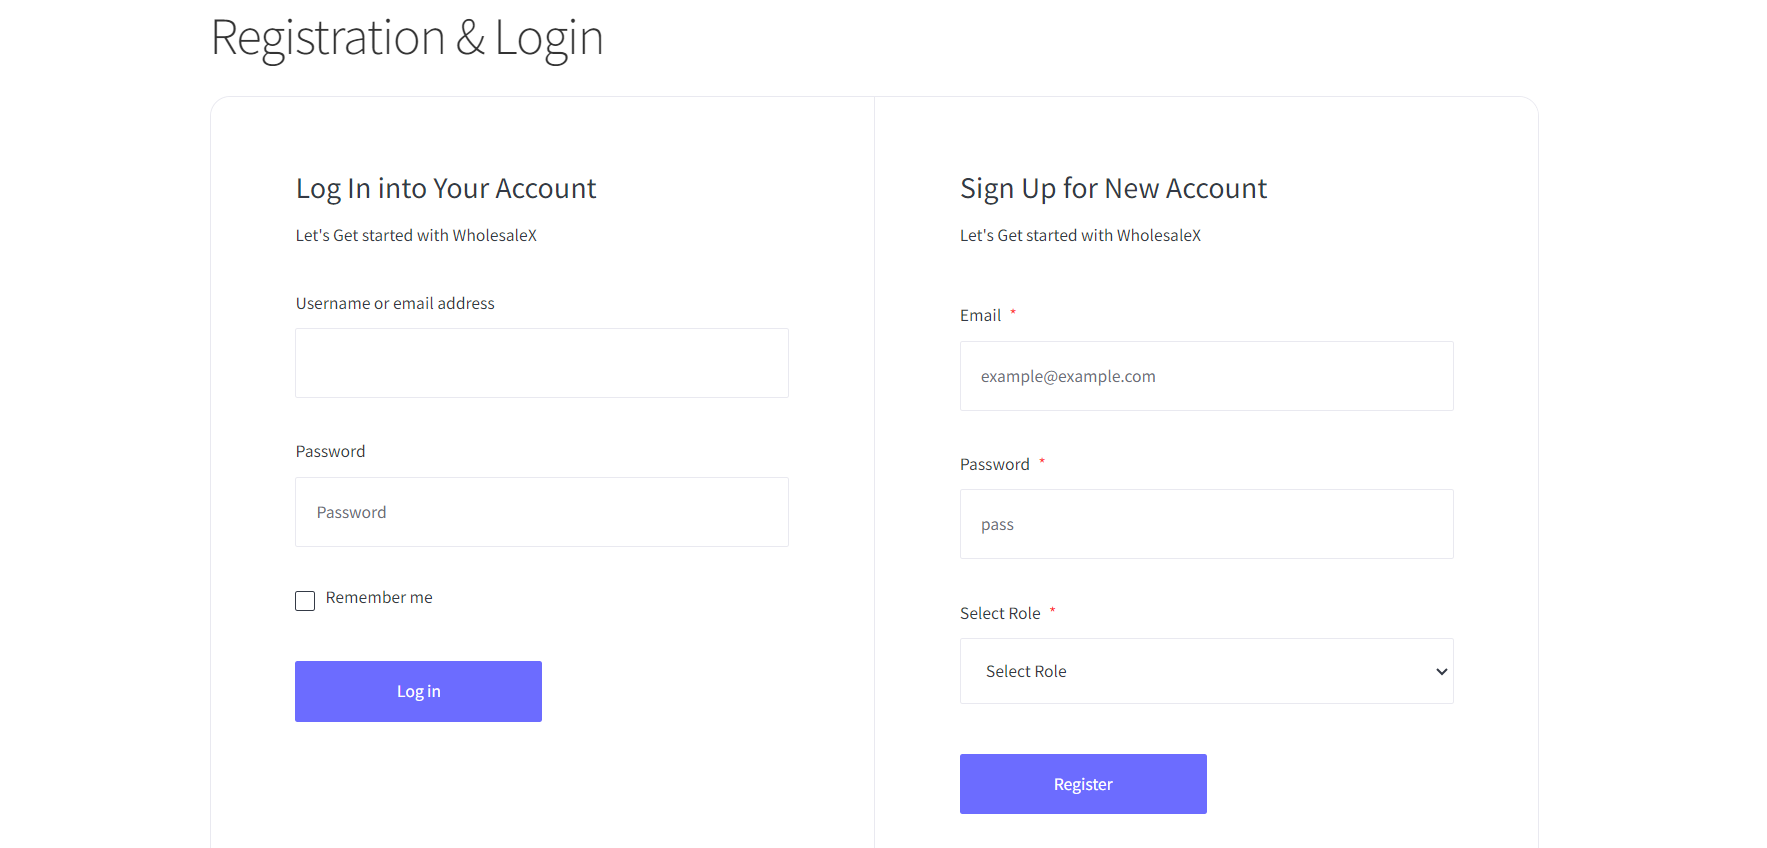 Final Output of Registration and Login Page